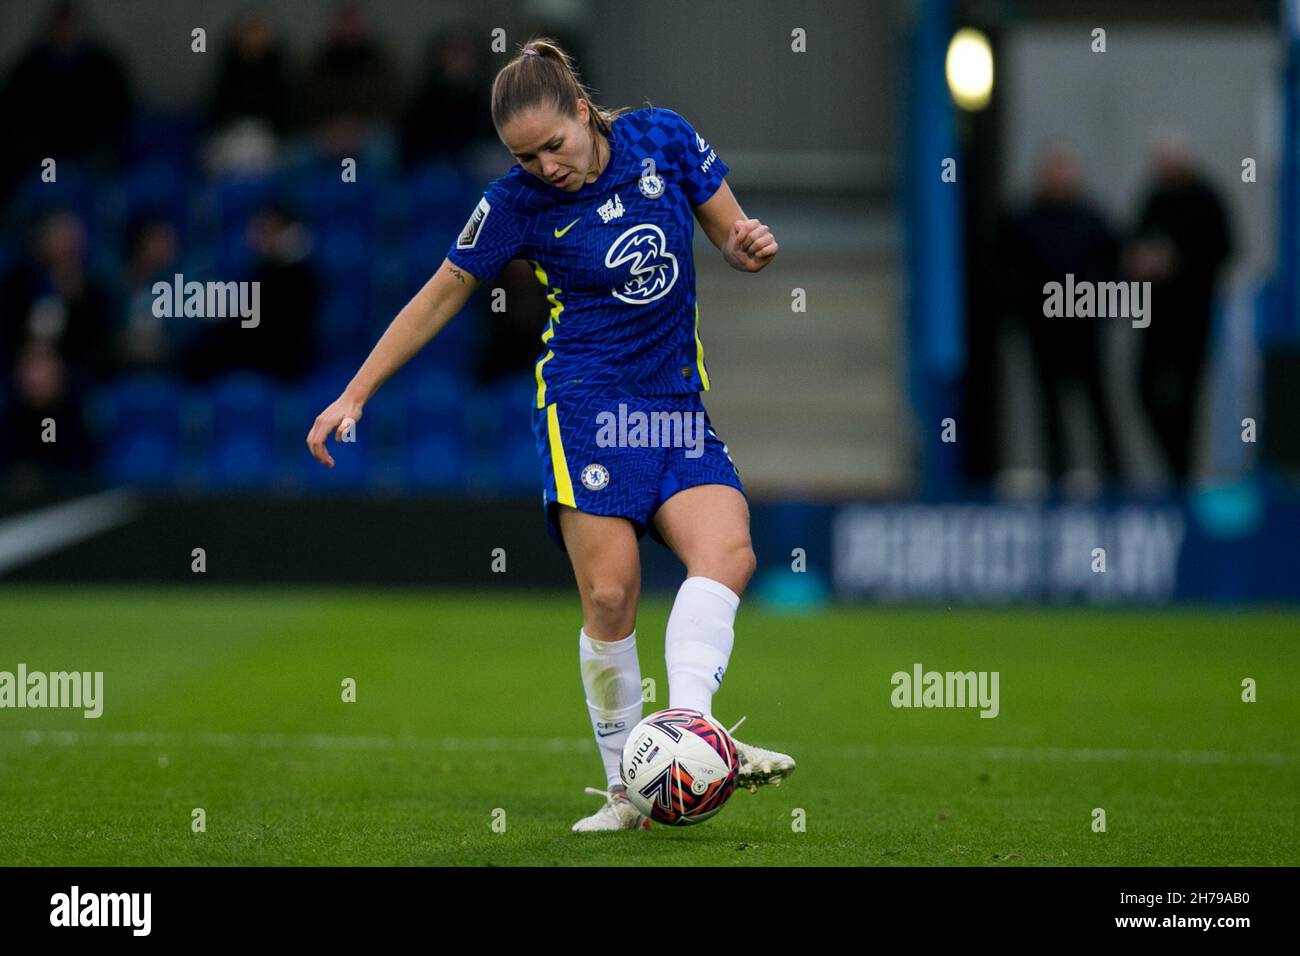 London, UK. 21st Nov, 2021. LONDON, UK. NOVEMBER 21ST : Guro Reiten of Chelsea FC controls the ball during the 2021-22 FA Womens Superleague fixture between Chelsea FC and Birmingham City at Kingsmeadow. Credit: Federico Guerra Morán/Alamy Live News Stock Photo